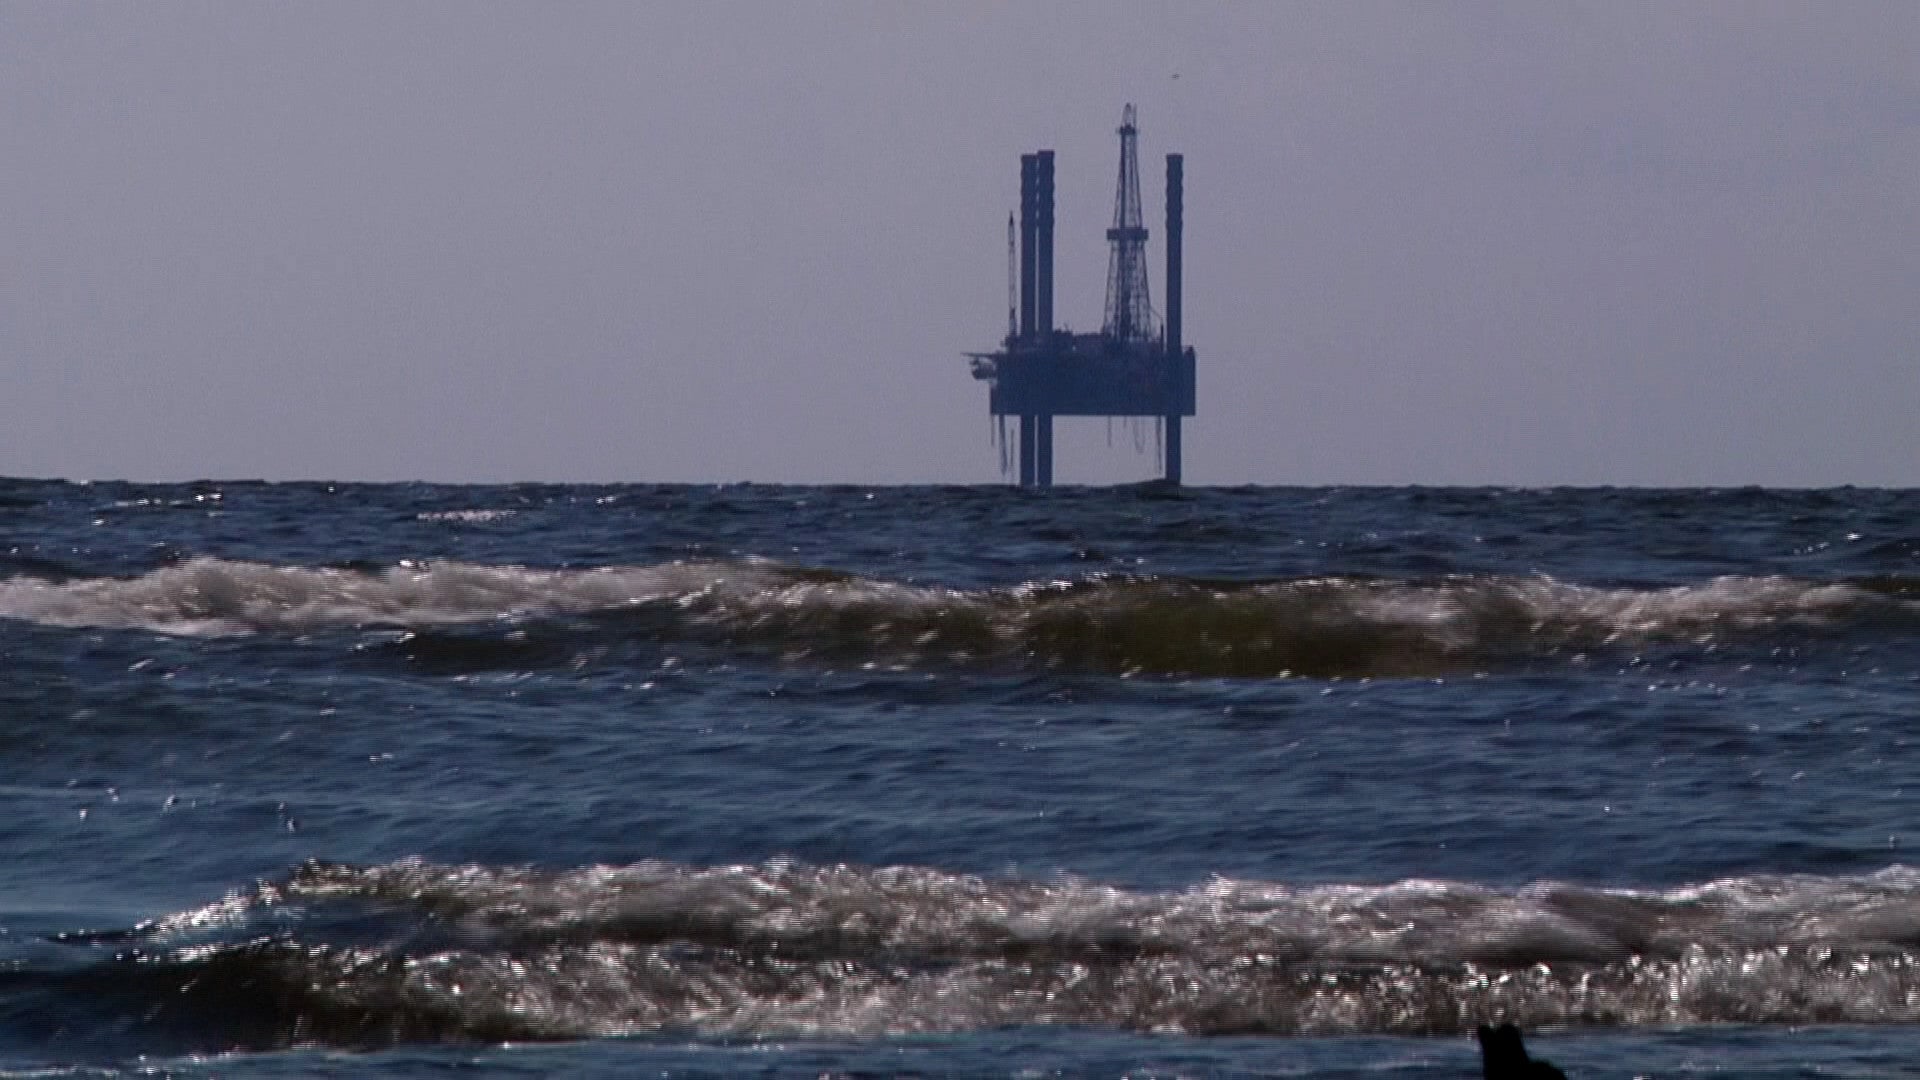 Oil rig Deepwater Horizon explosion from Ecocide documentary 